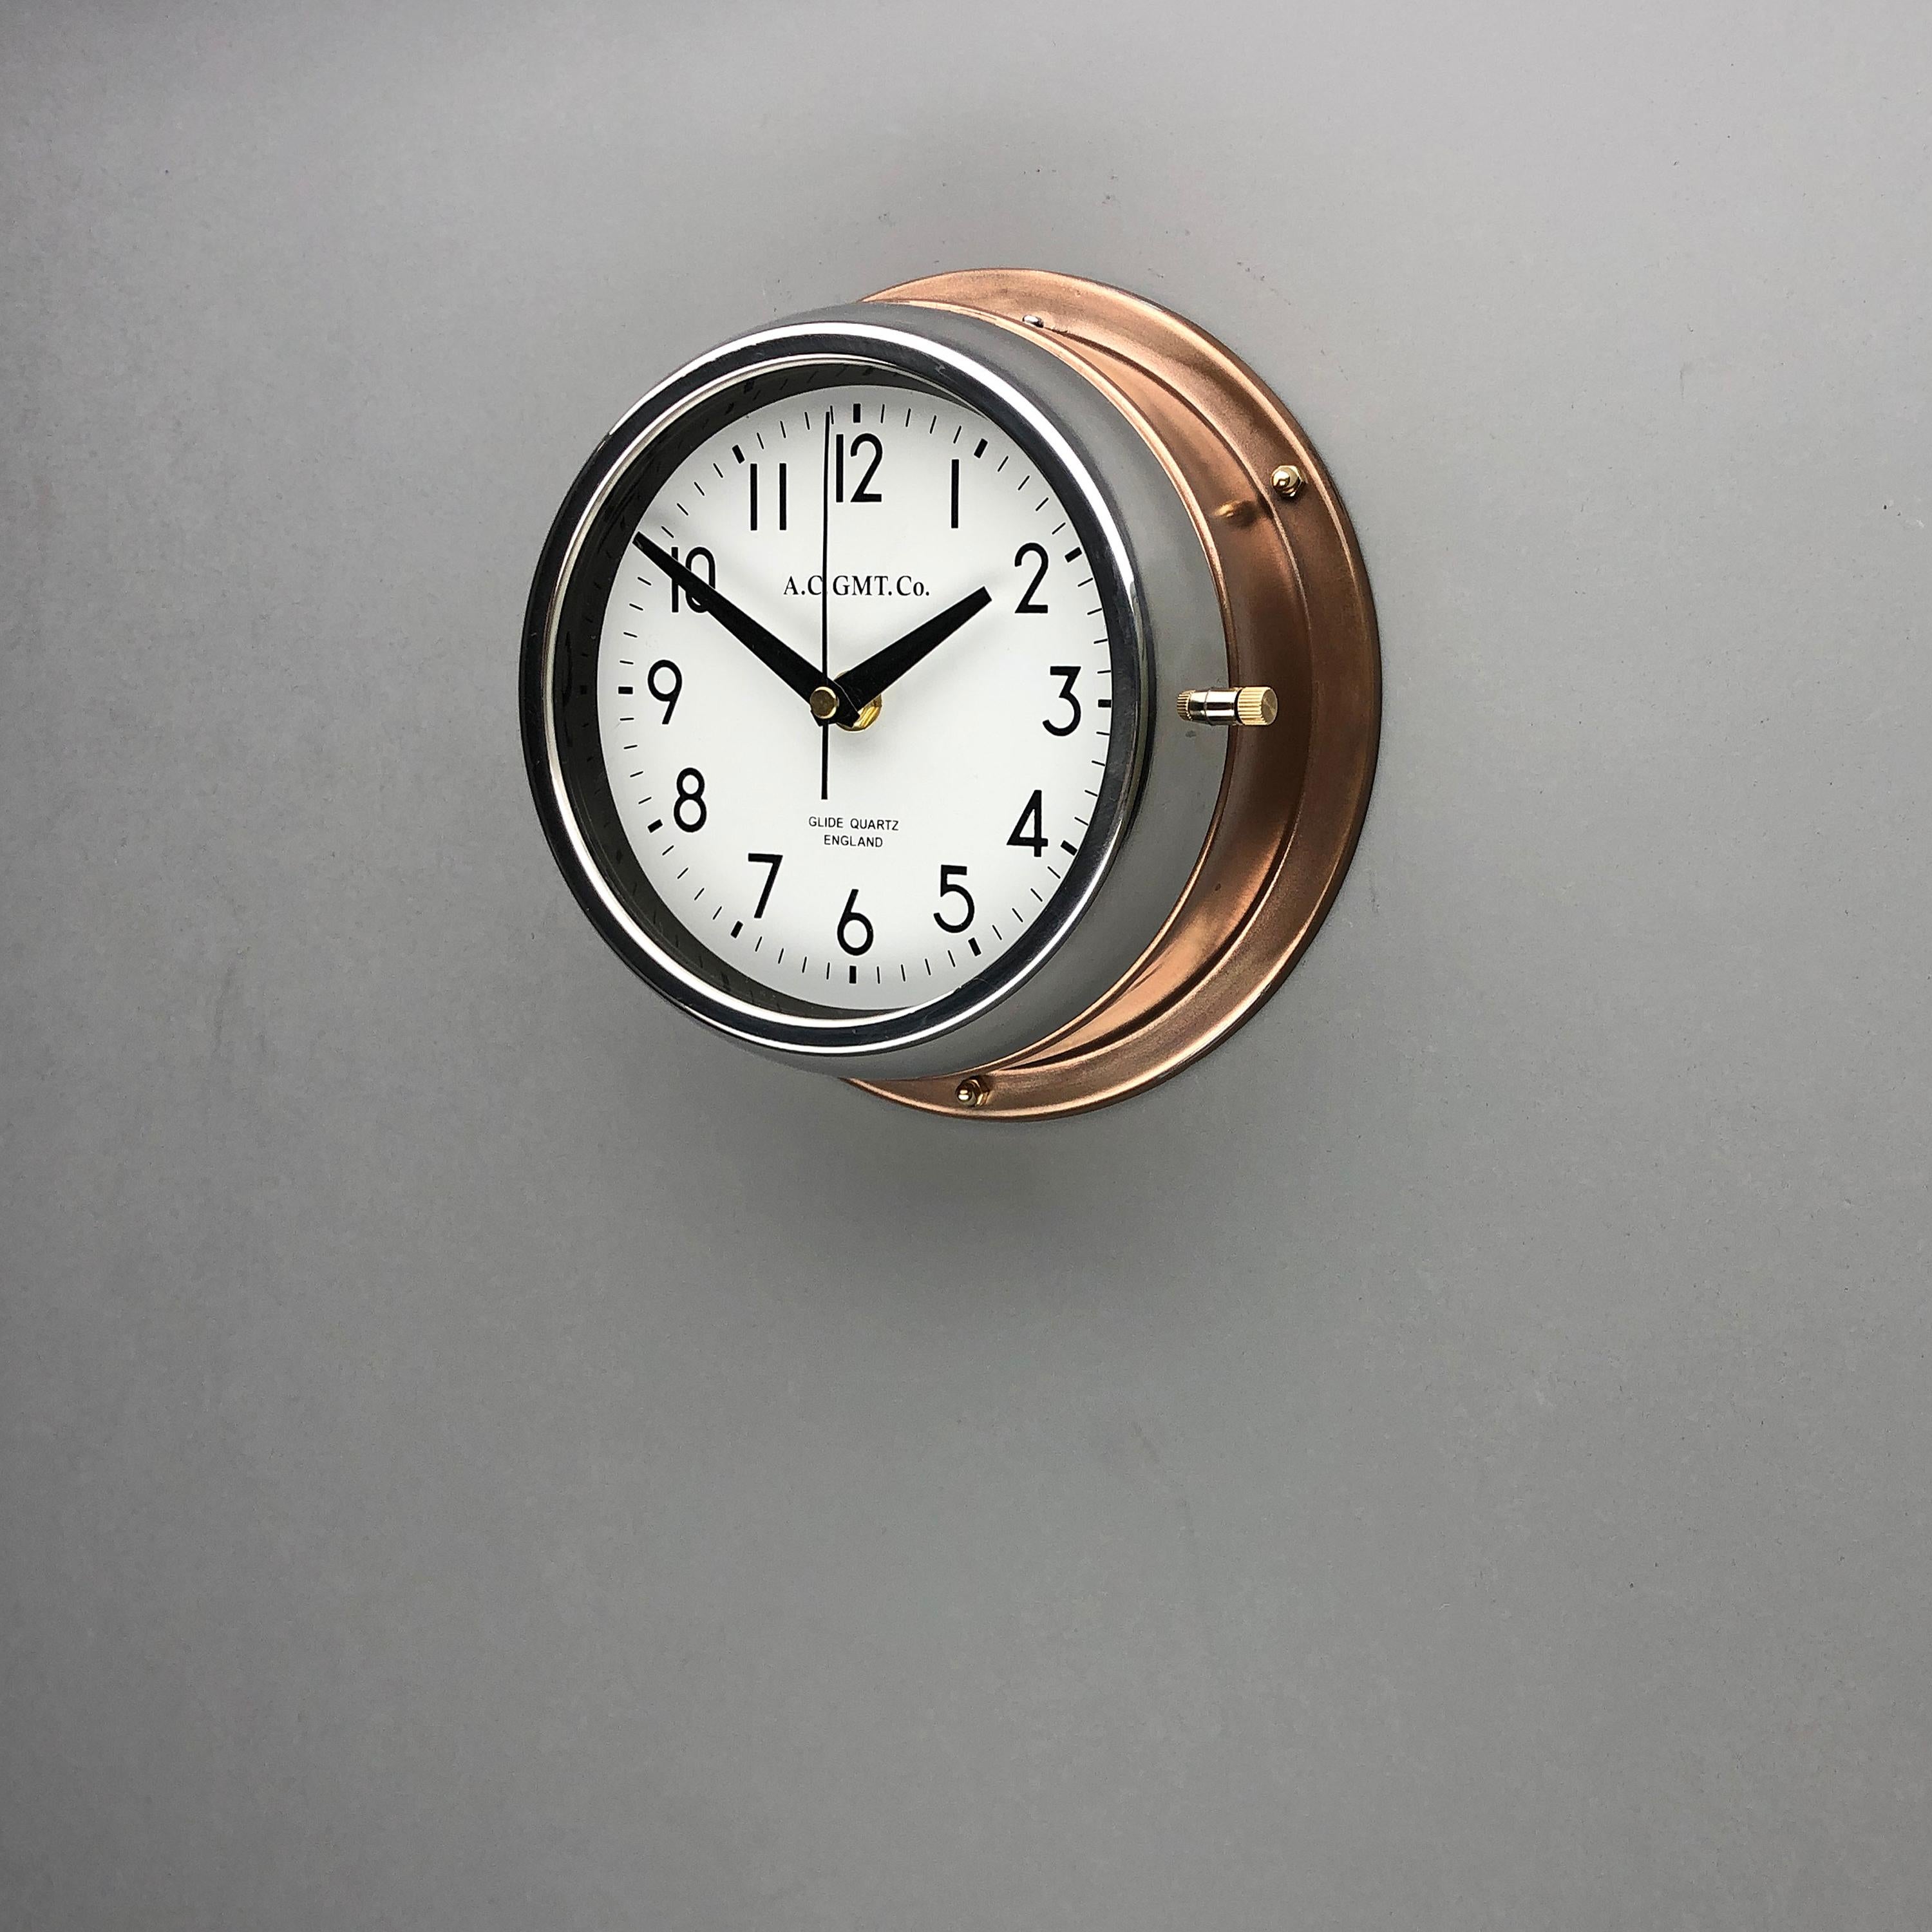 1970s British Bronze and Chrome AC GMT Co. Industrial Wall Clock White Dial 4